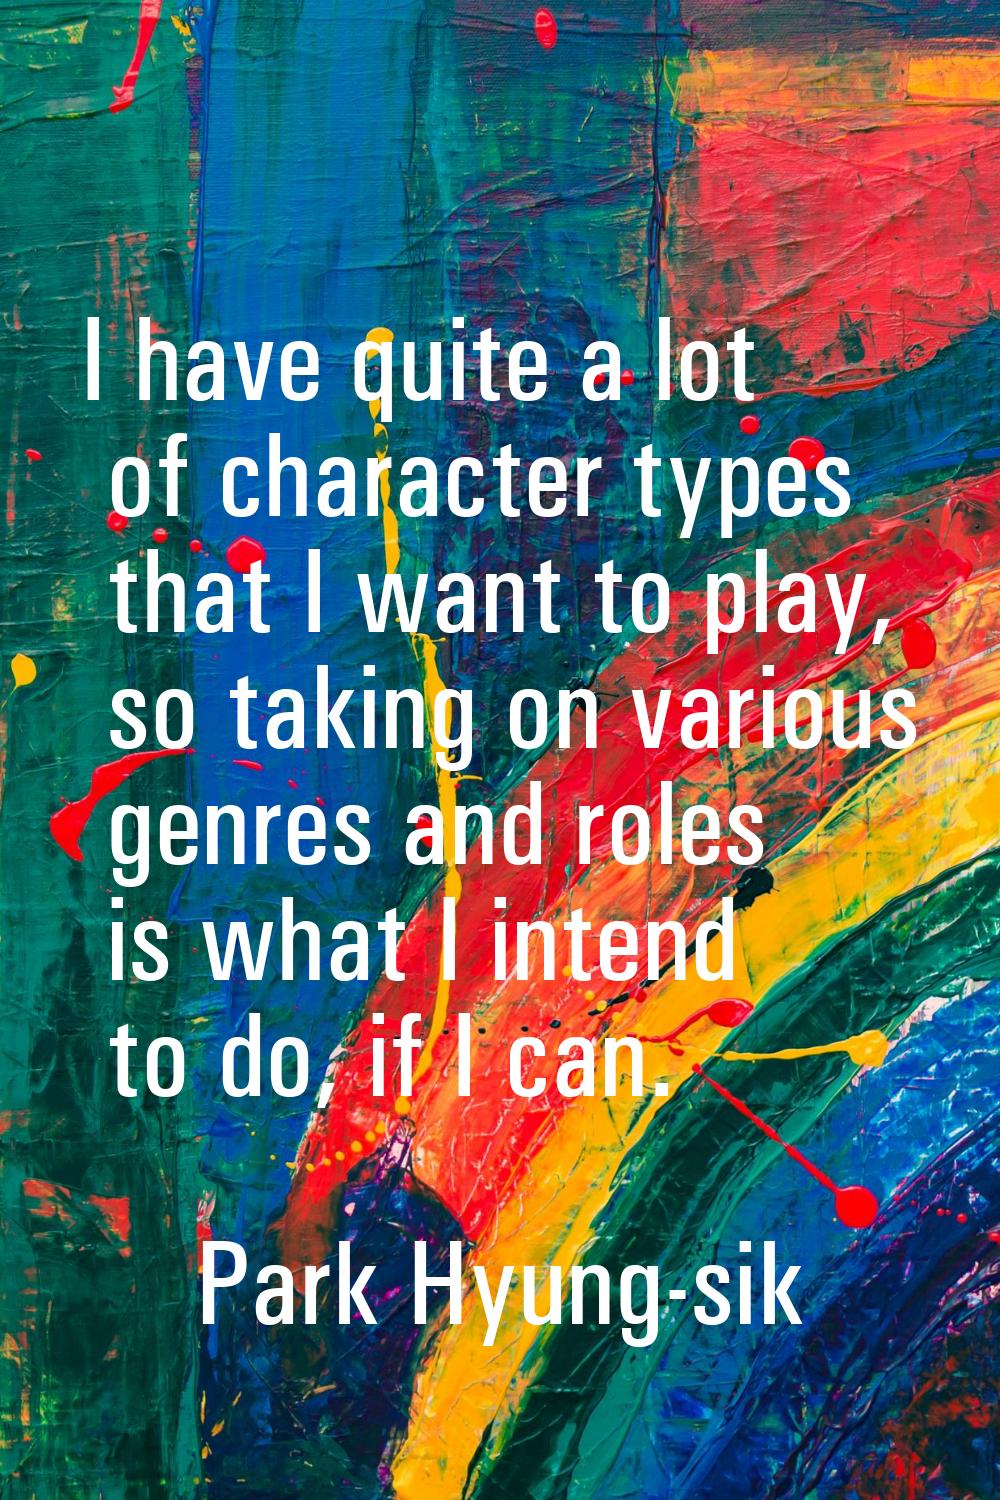 I have quite a lot of character types that I want to play, so taking on various genres and roles is